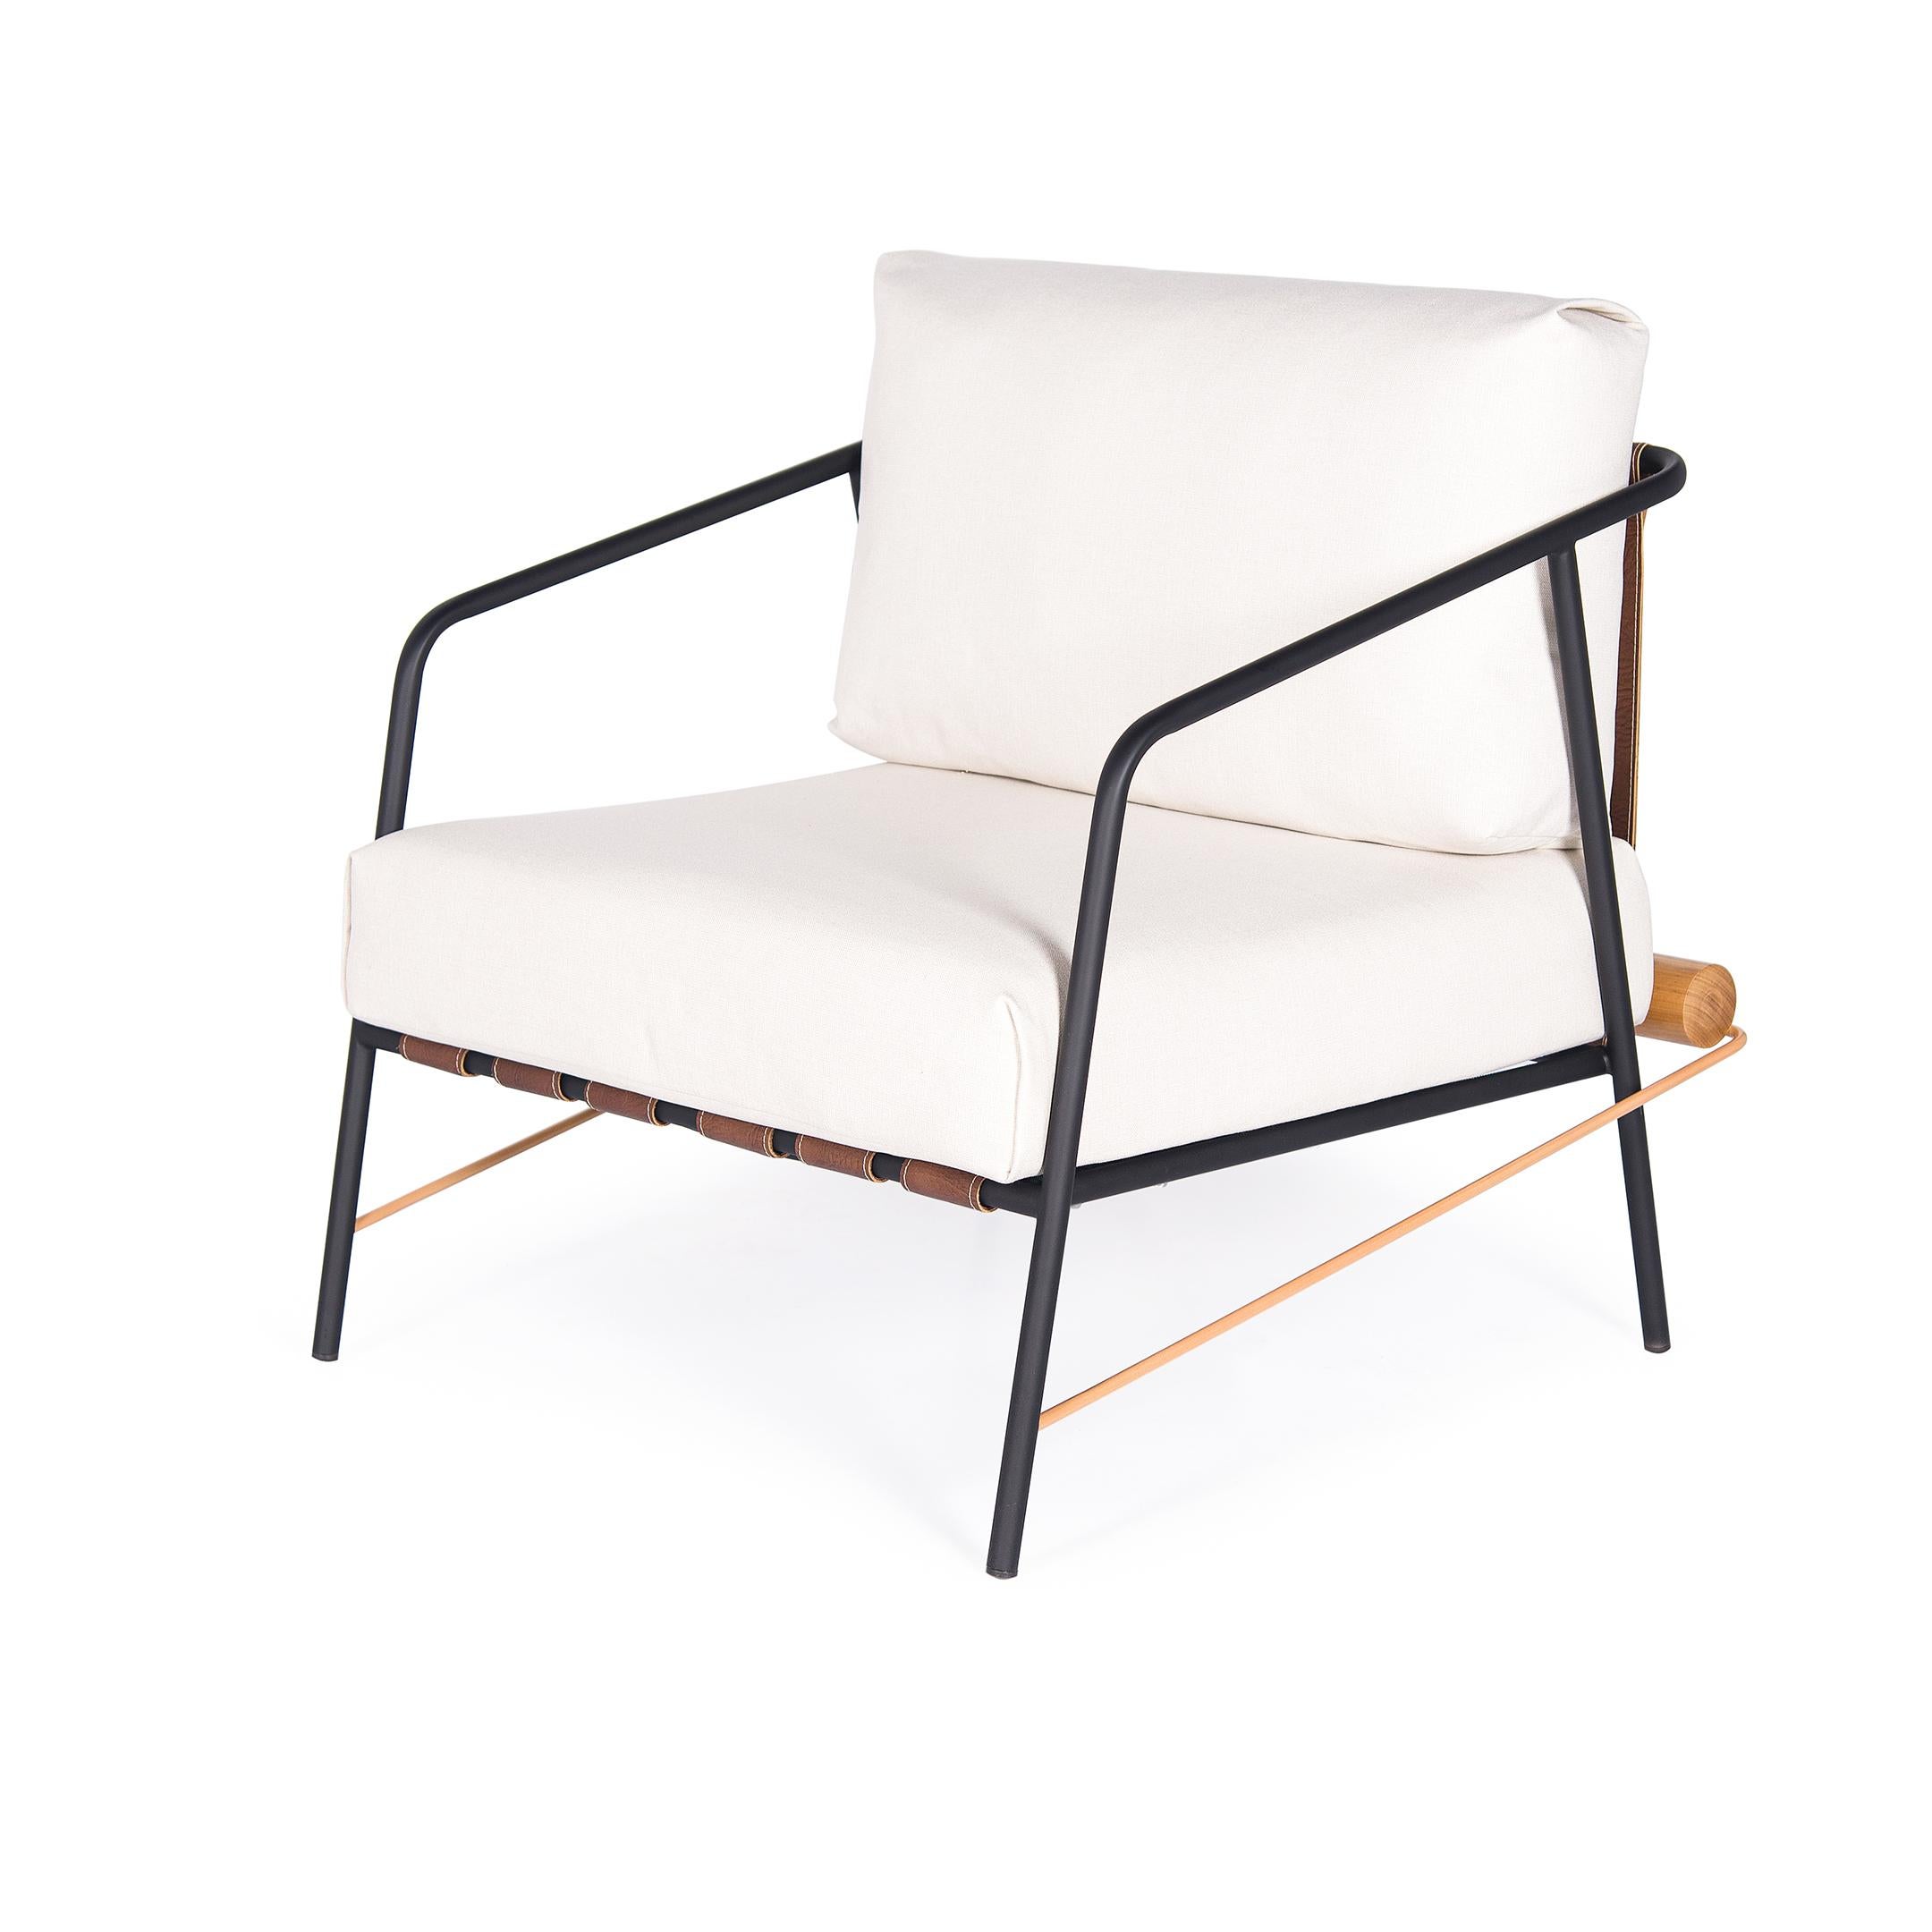 The structure of the OLAV armchair is made of carbon steel in the painted with black ink, has a matte gold detail at the bottom.
It has percinta elastics at the base.
The upholstery fabric that can be customized (request information).
It has leather